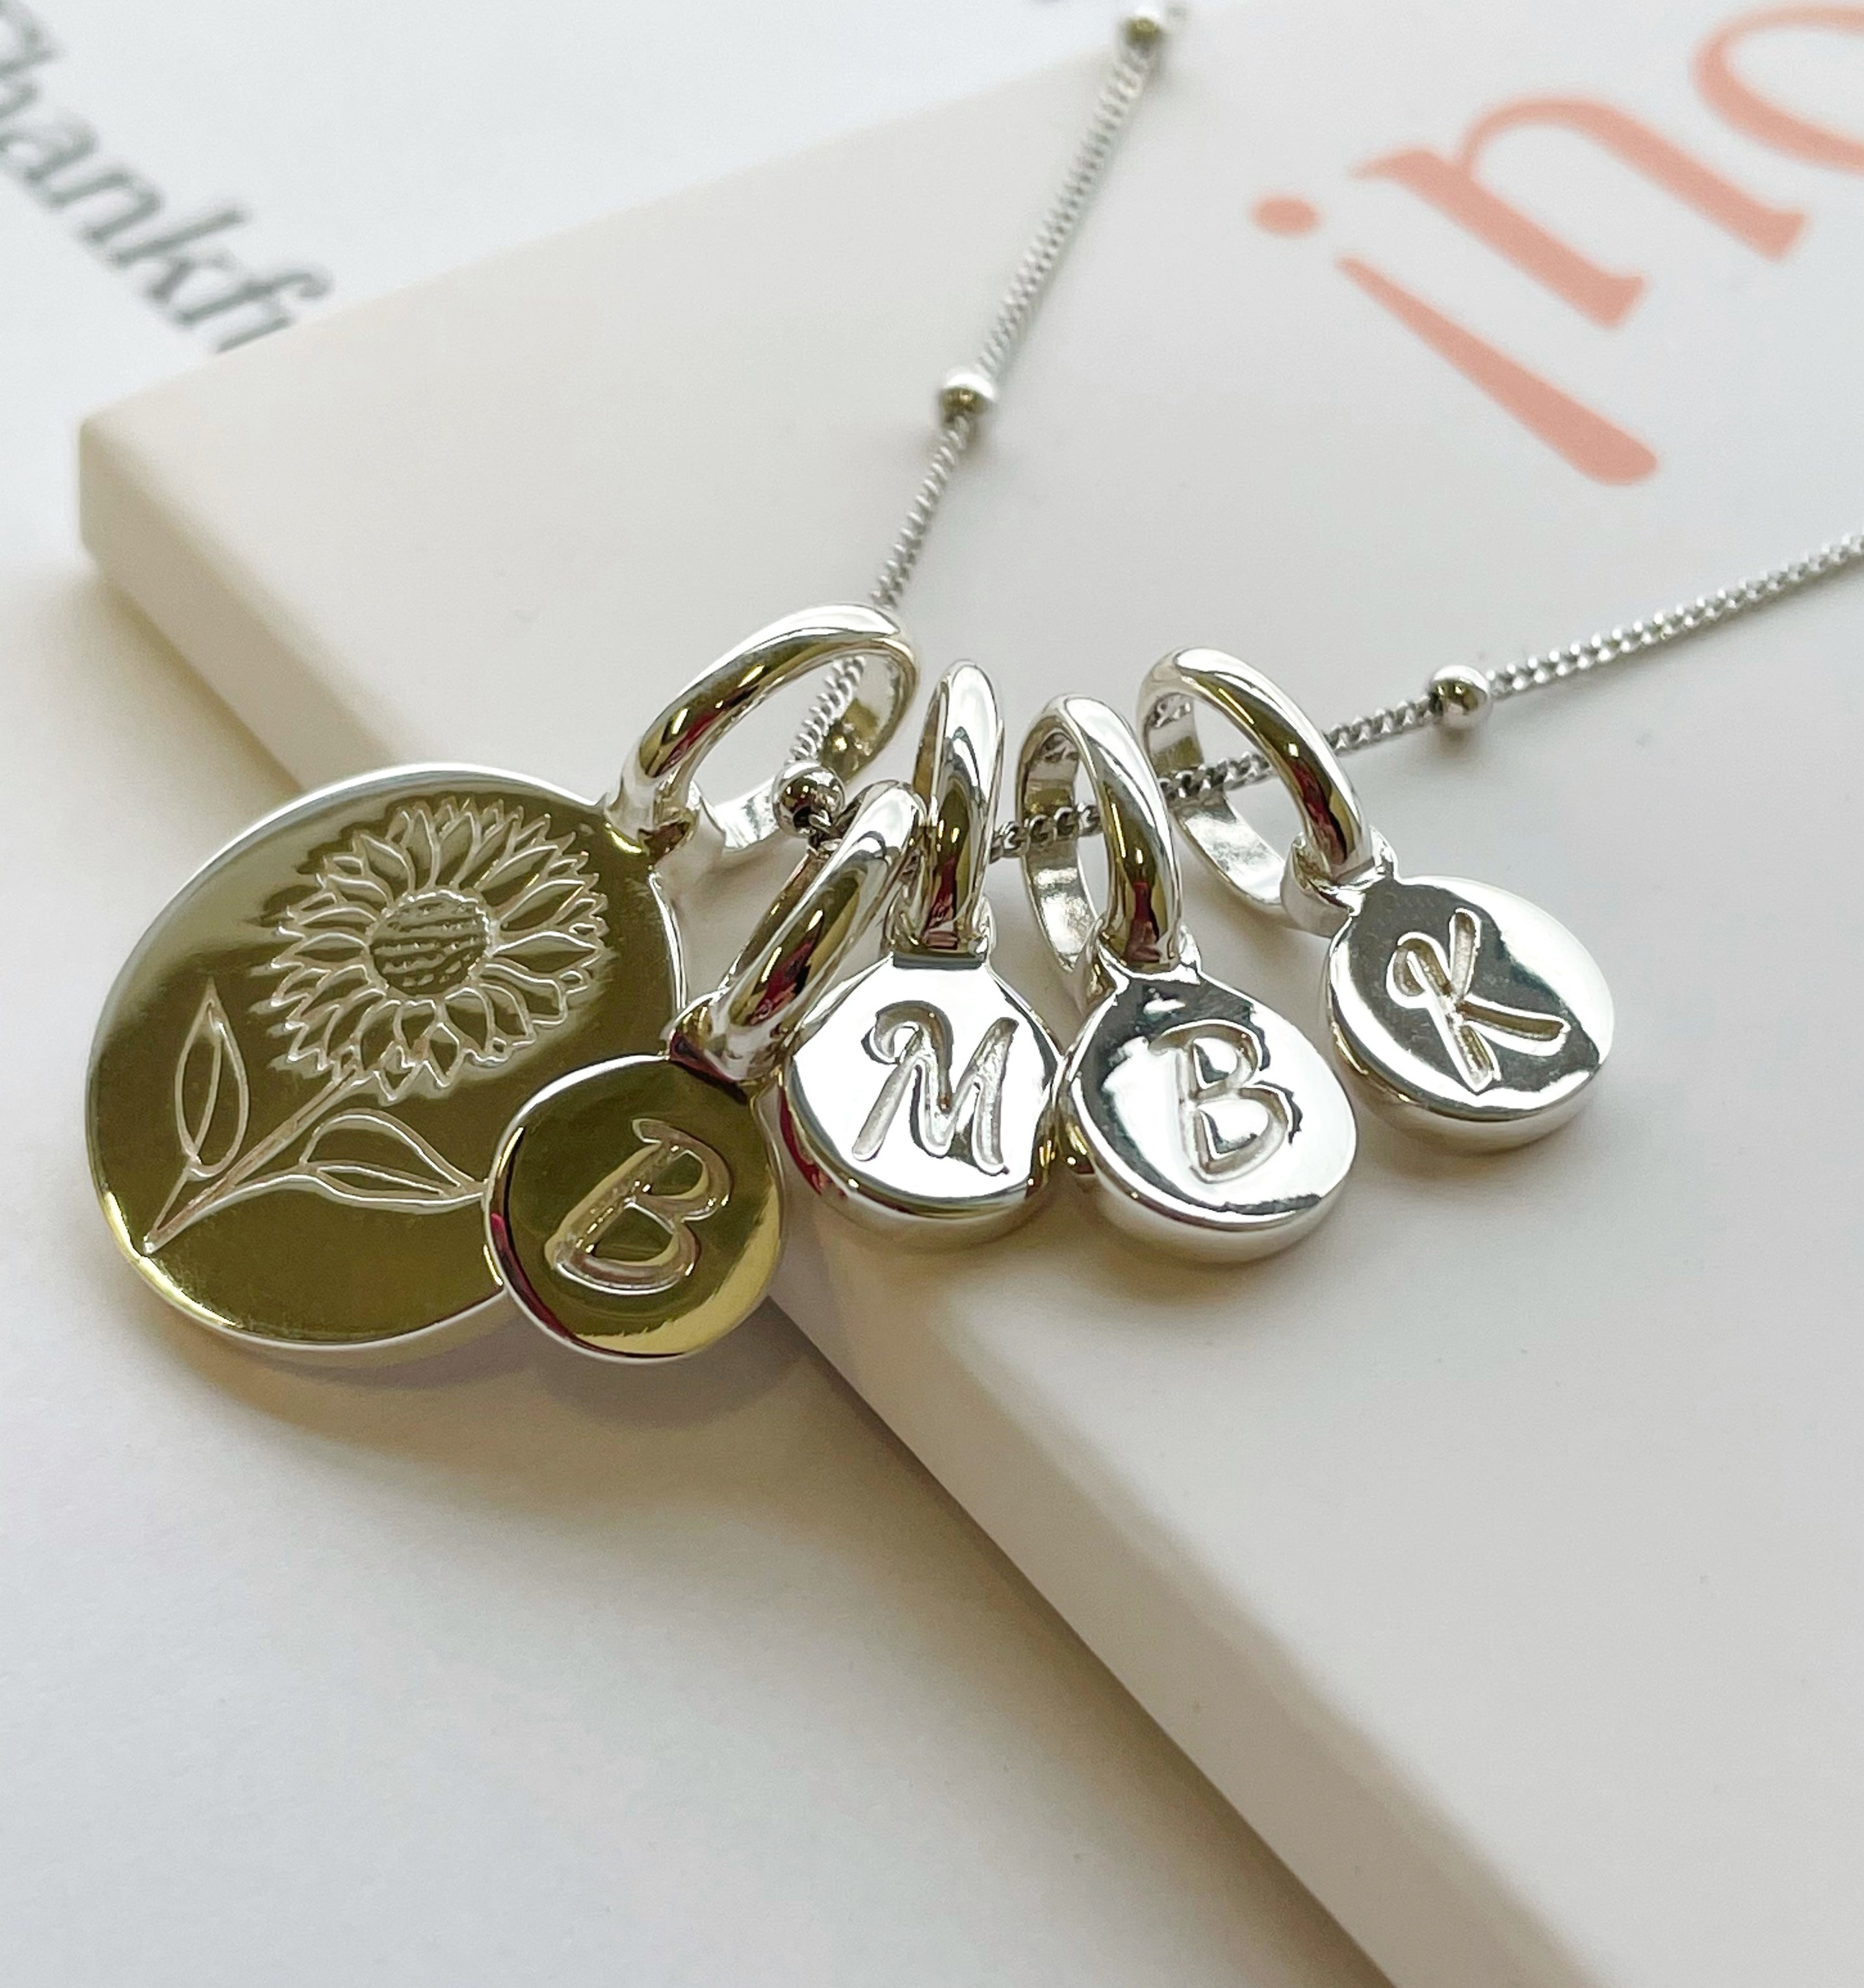 Carnation Initial Necklace - January Flower